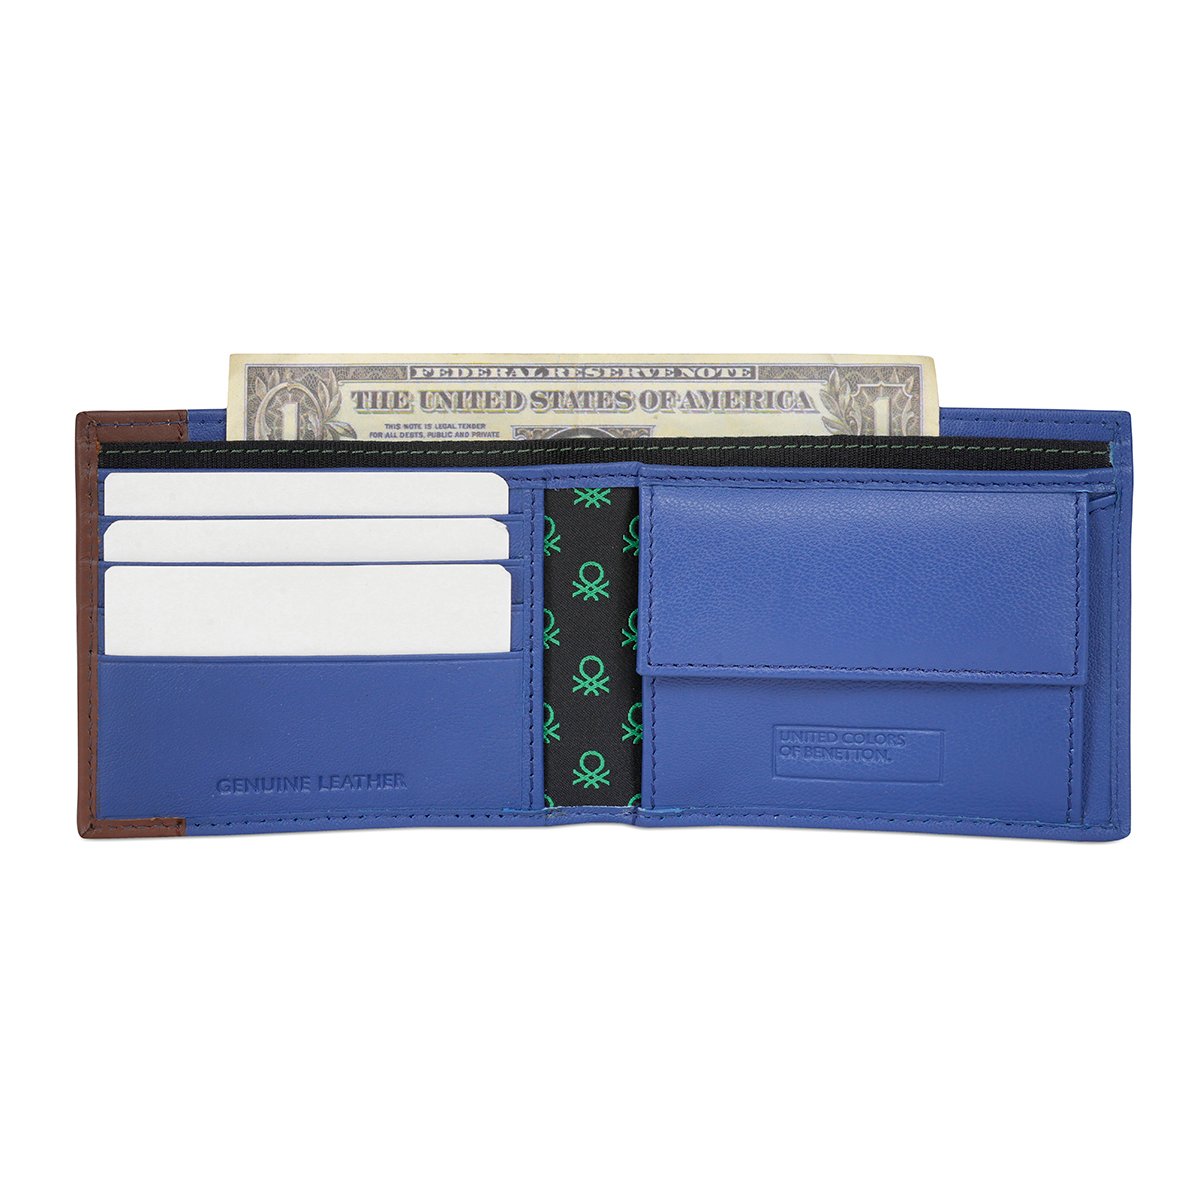 Copy of United Colors of Benetton Aroldo Global Coin Wallet Blue